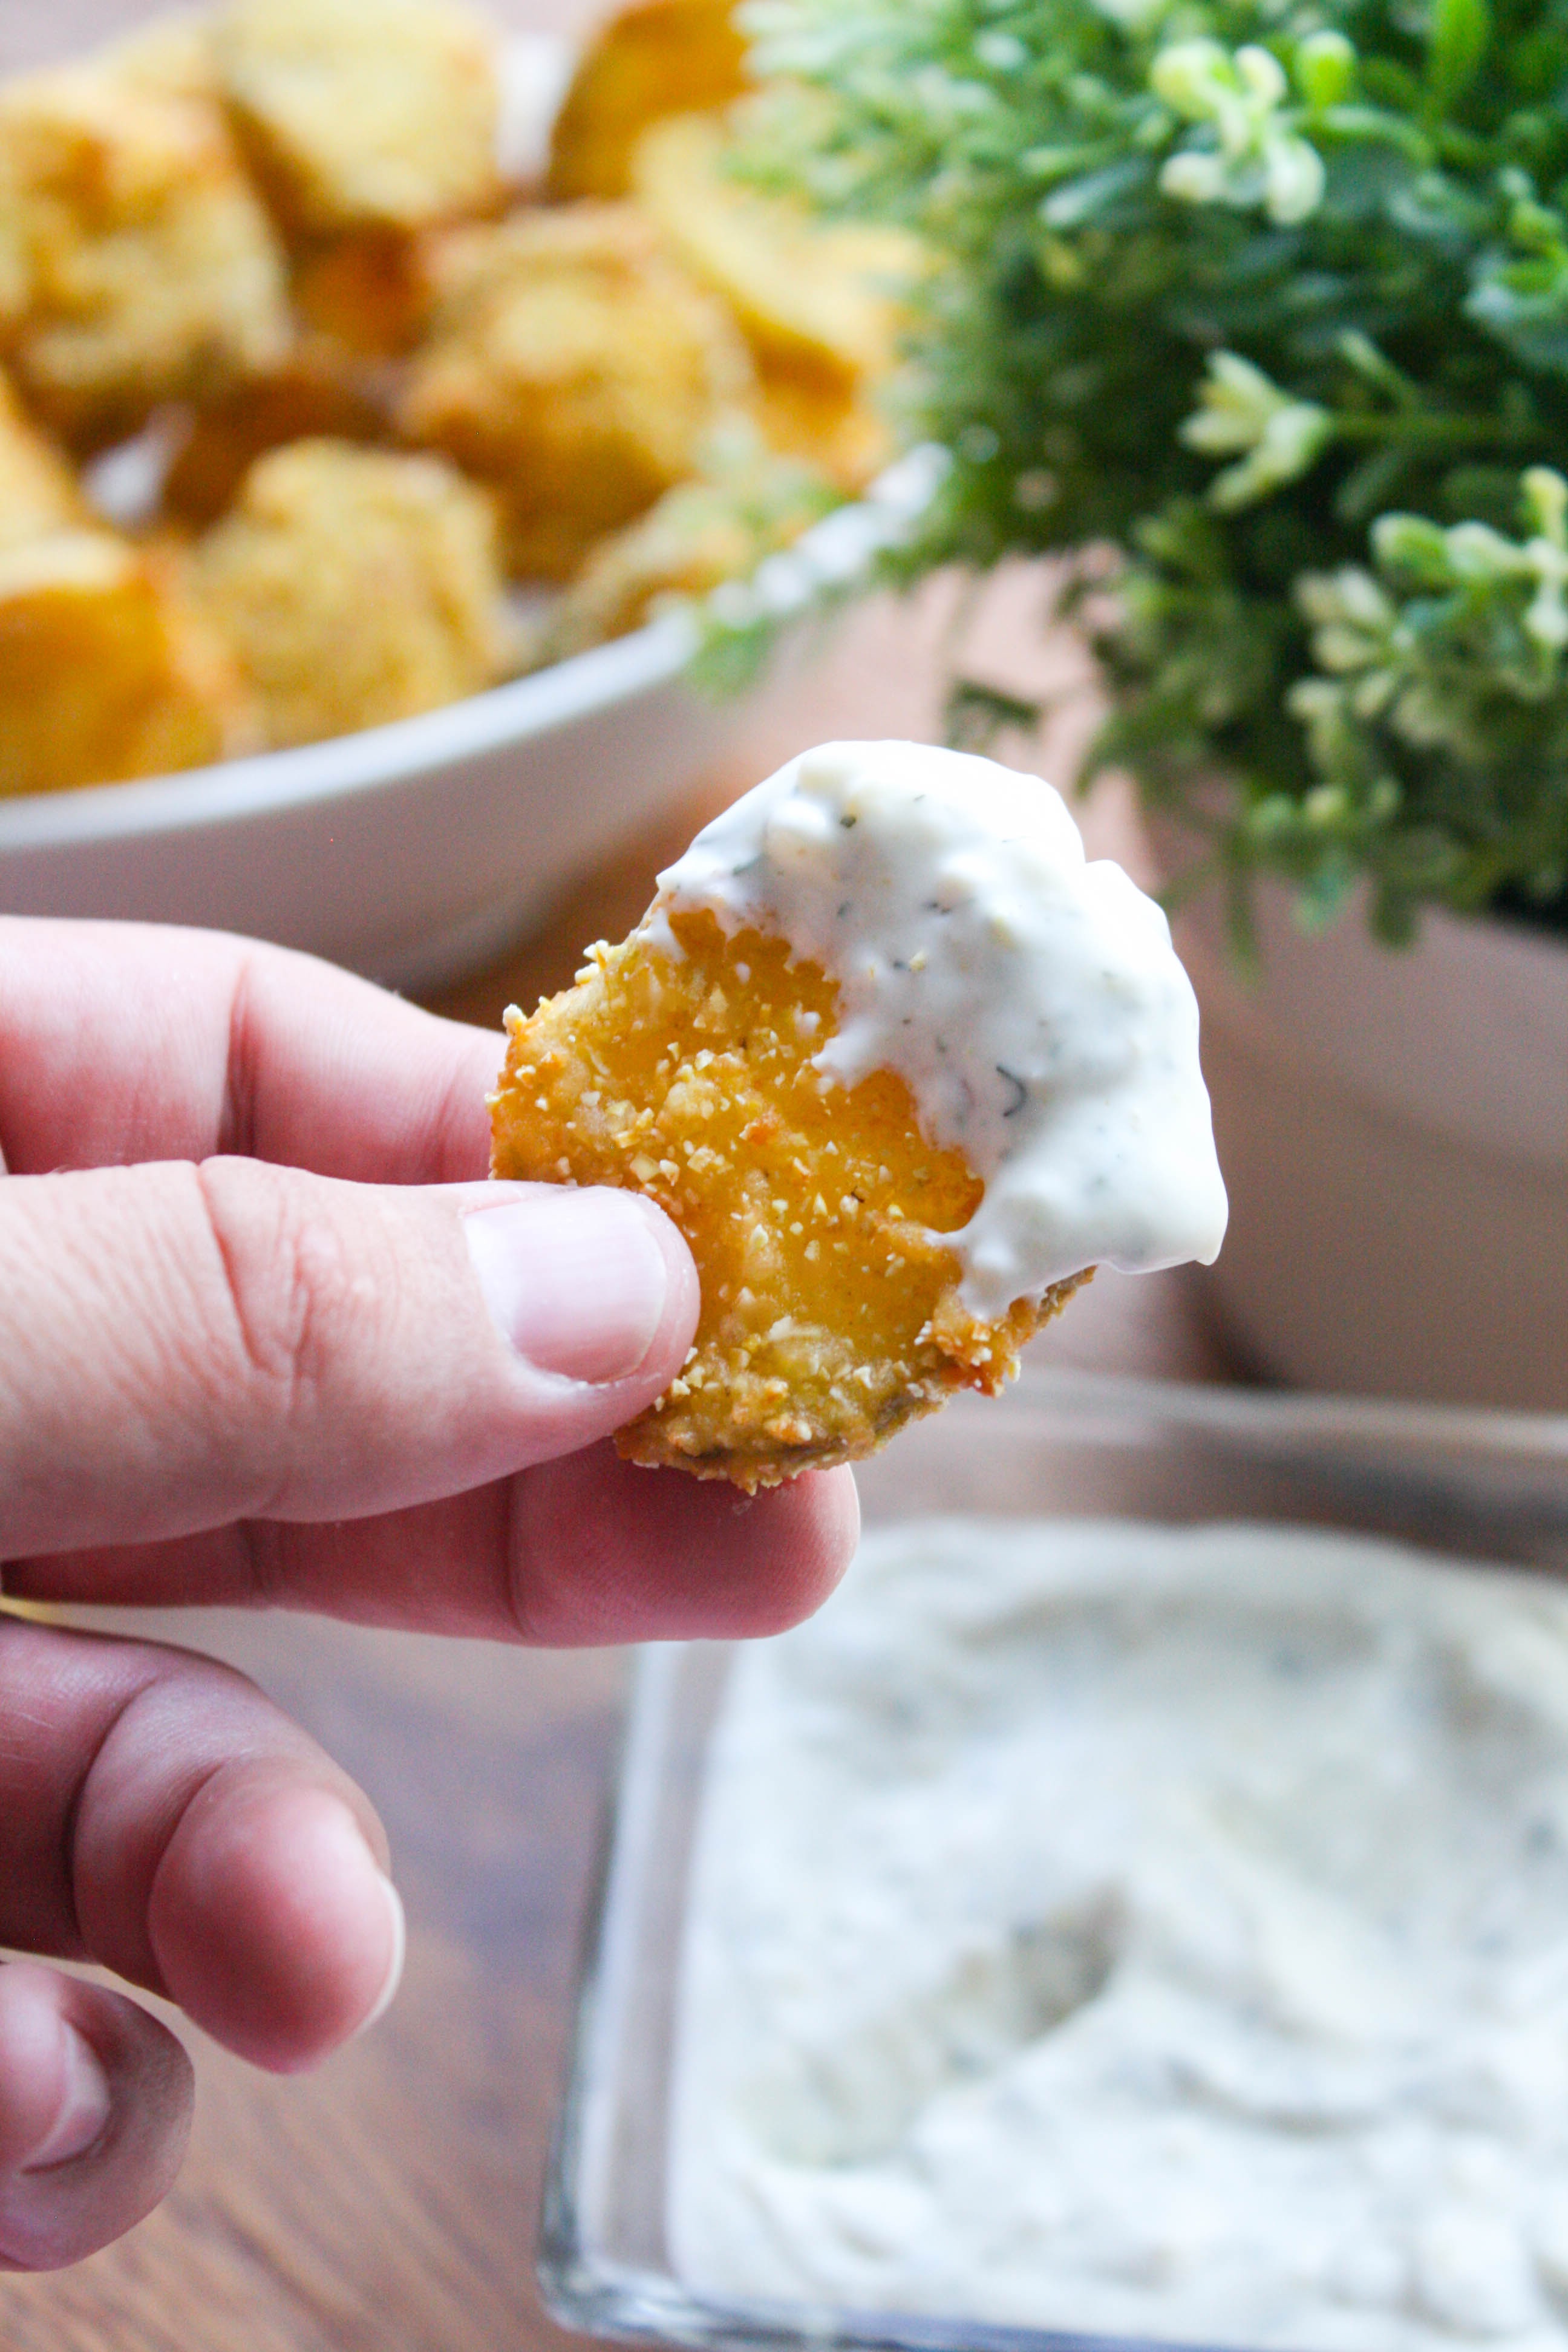 Fried Pickles with Homemade Buttermilk Ranch Dressing make a fabulous anytime snack! You'll love the fried pickles dunked into the tasty dip -- the perfect snack!